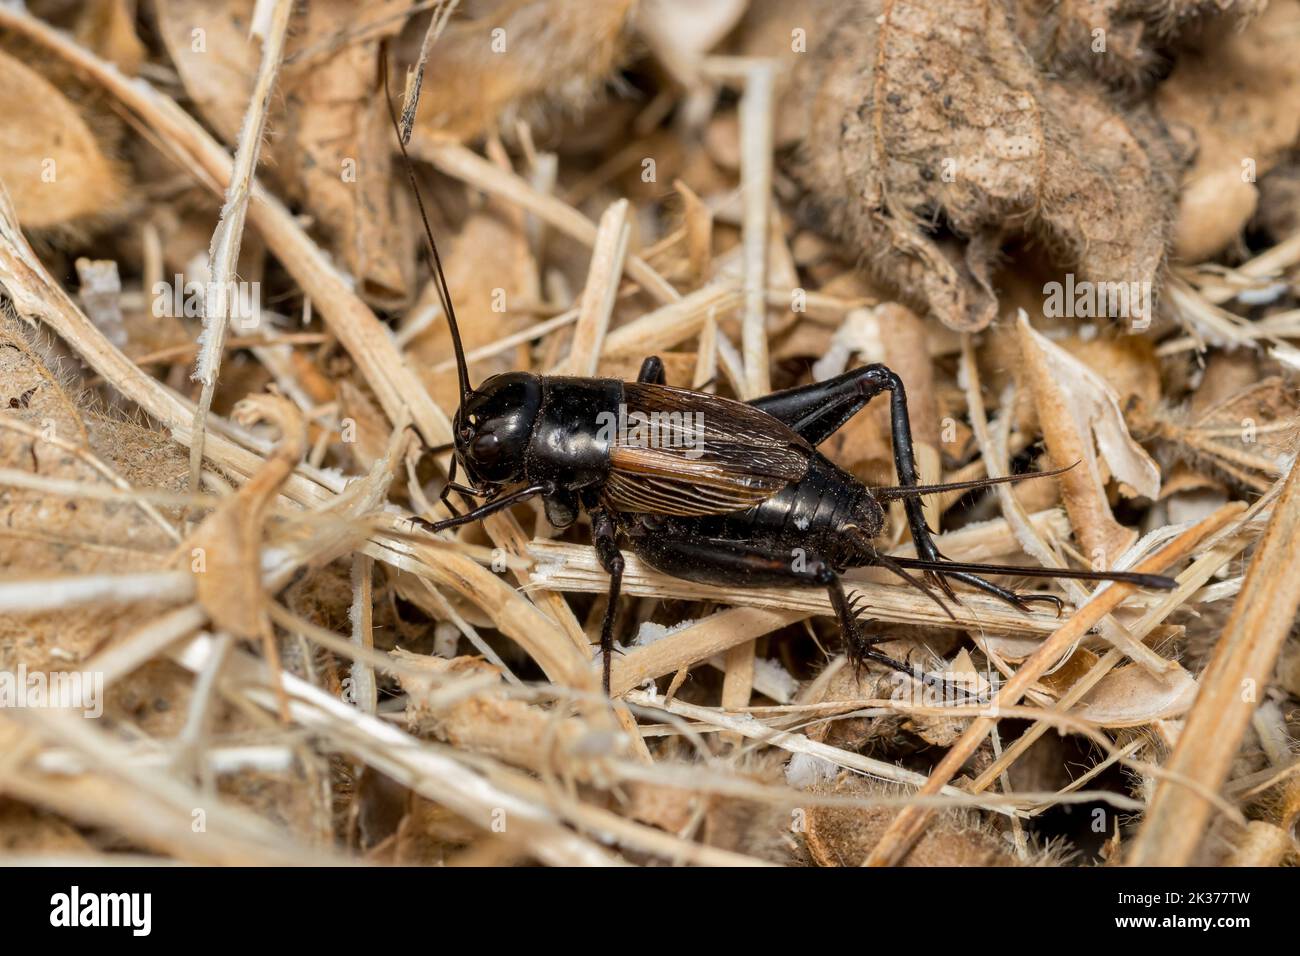 Closeup of Field Cricket. Pest control, insect and nature conservation concept. Stock Photo